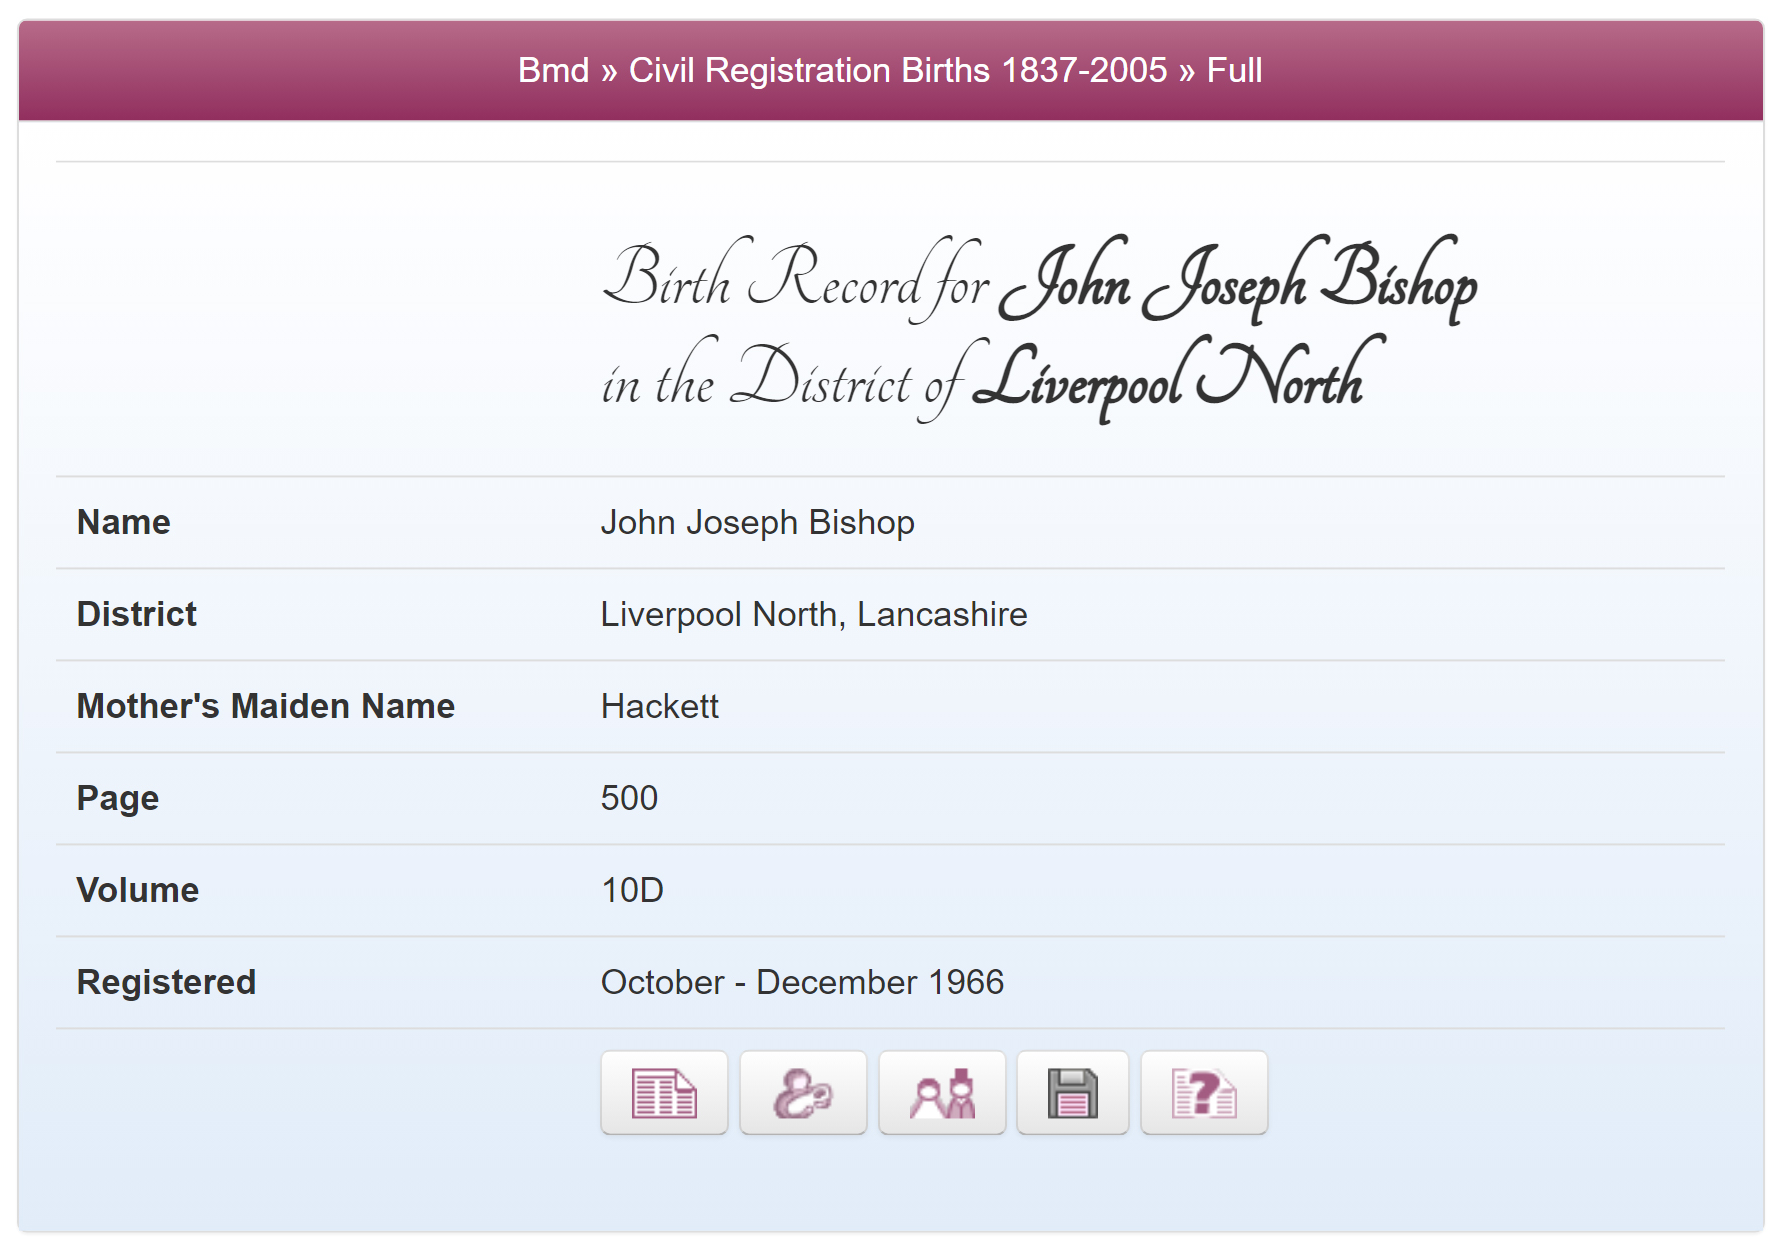 Marriage of John's  parents in 1966 with link in bottom right to view details of potential children